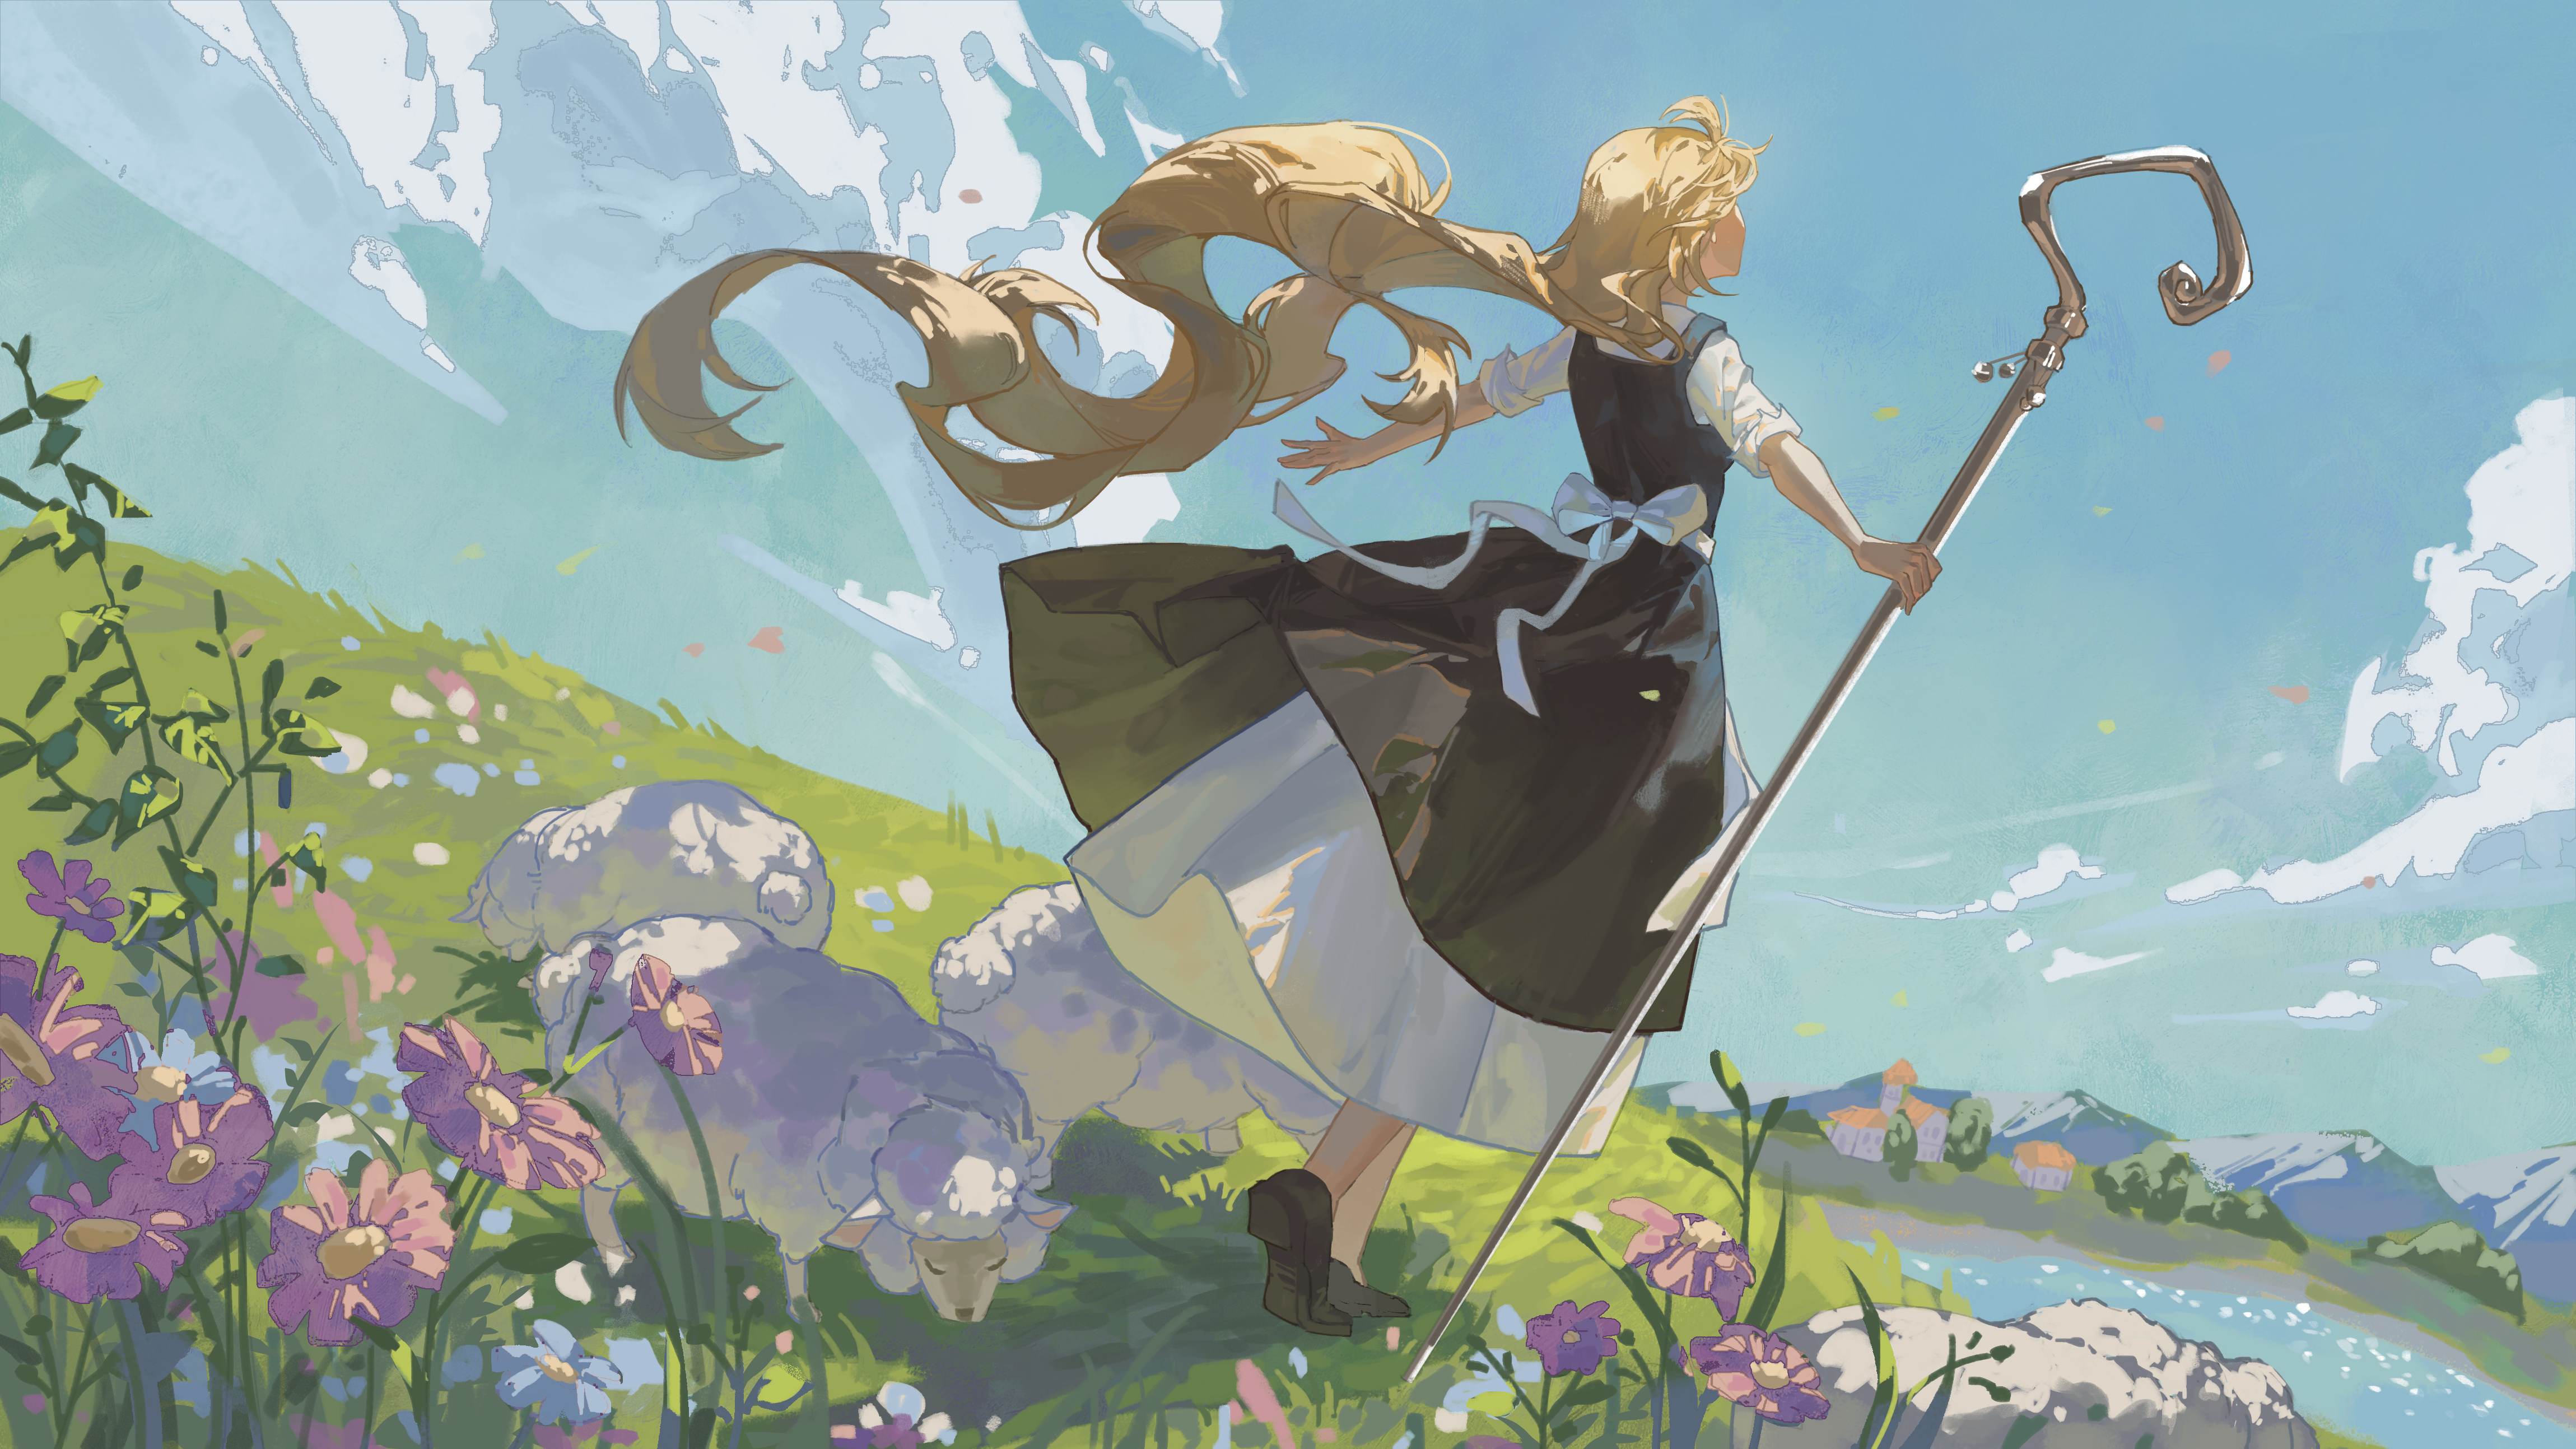 Anime Anime Girls Long Hair Blonde Flowers Grass Sky Clouds Water Mountains Standing Looking Up Shee 4599x2587